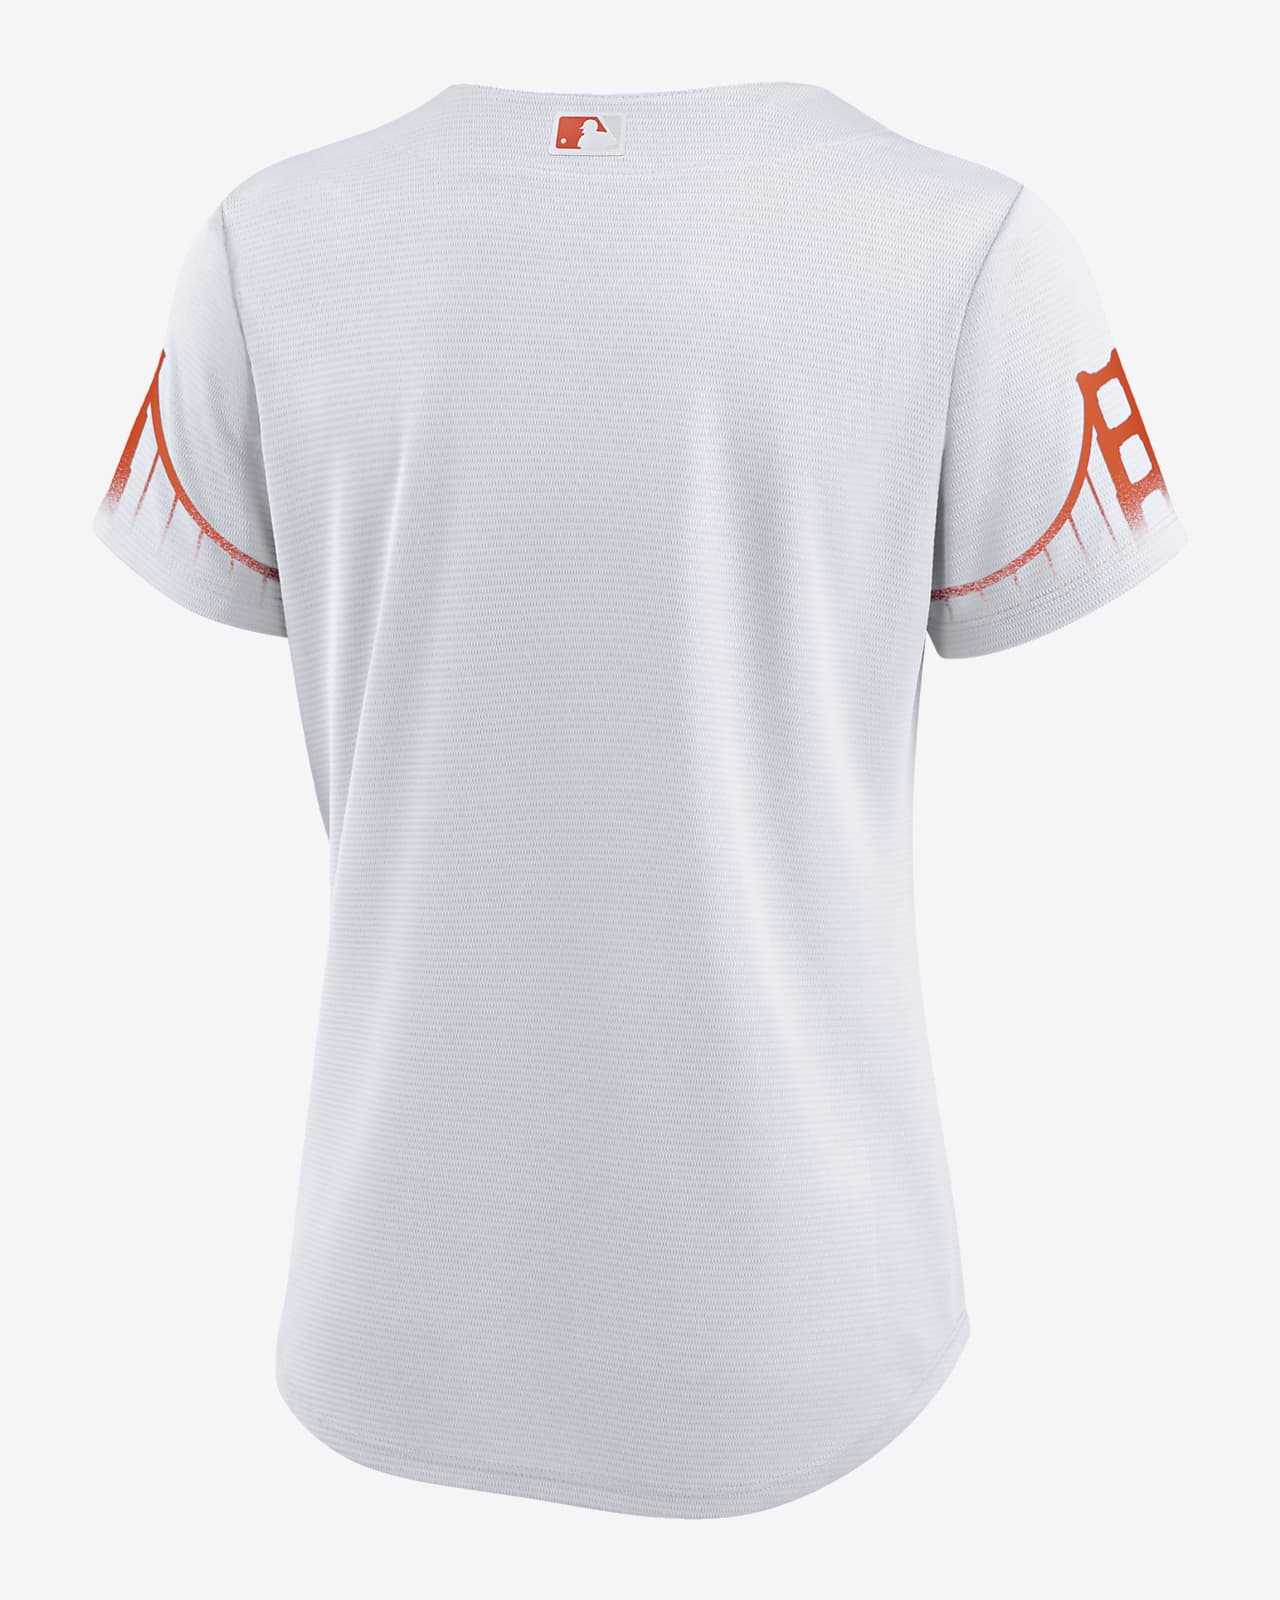 san francisco city connect jersey